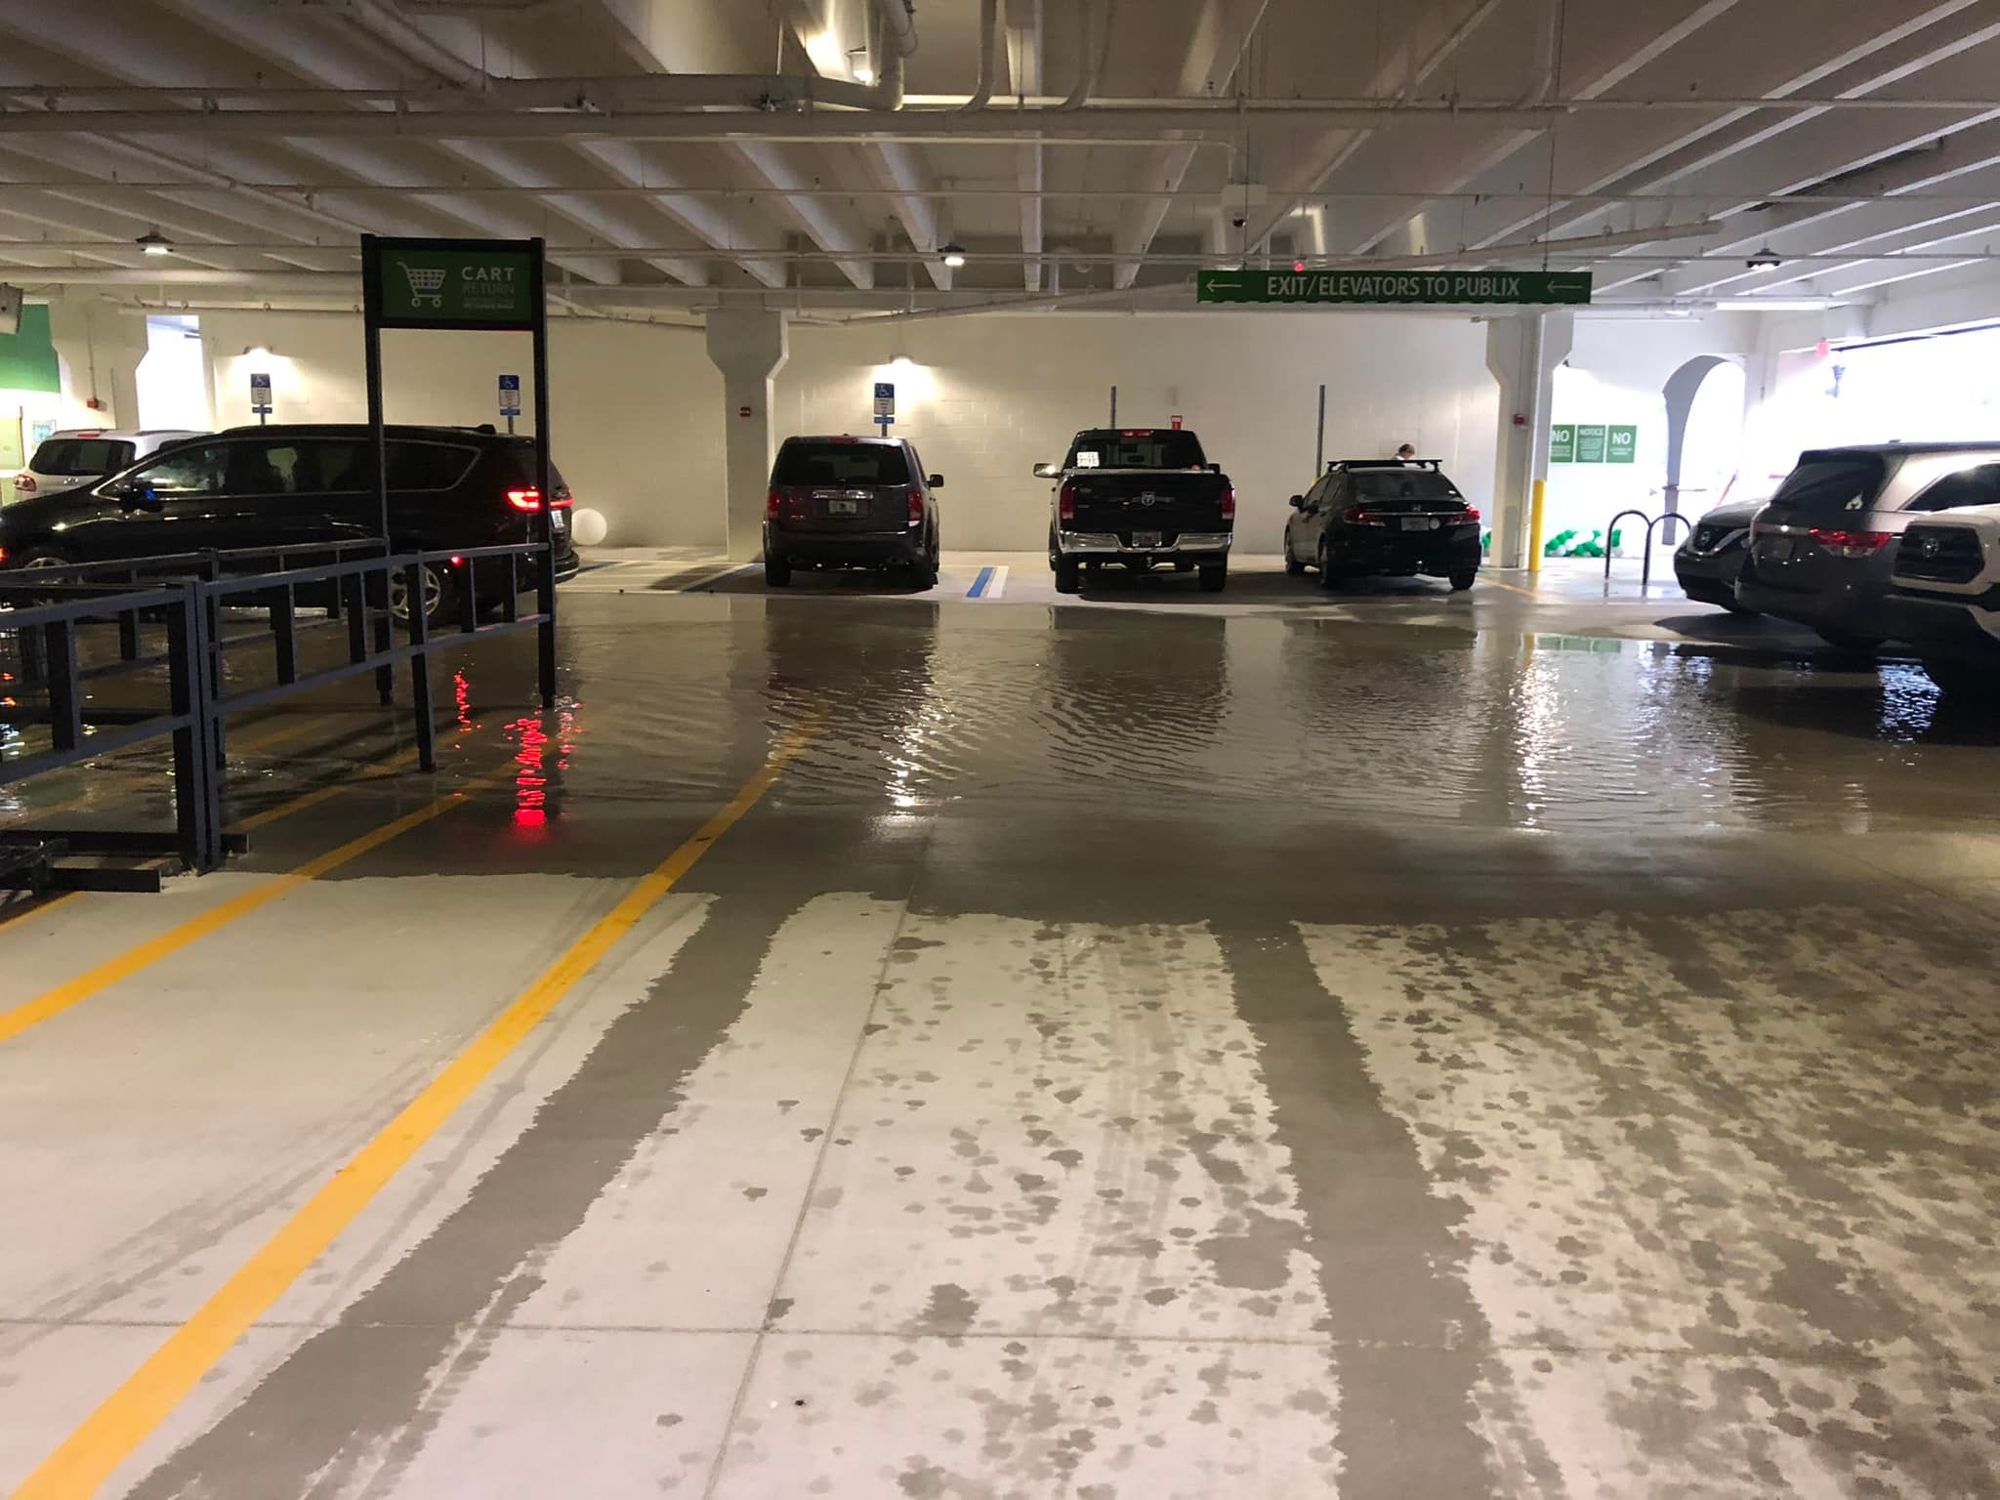 News4Jax.com posted this photo of the flooding in the San Marco Publix parking garage.